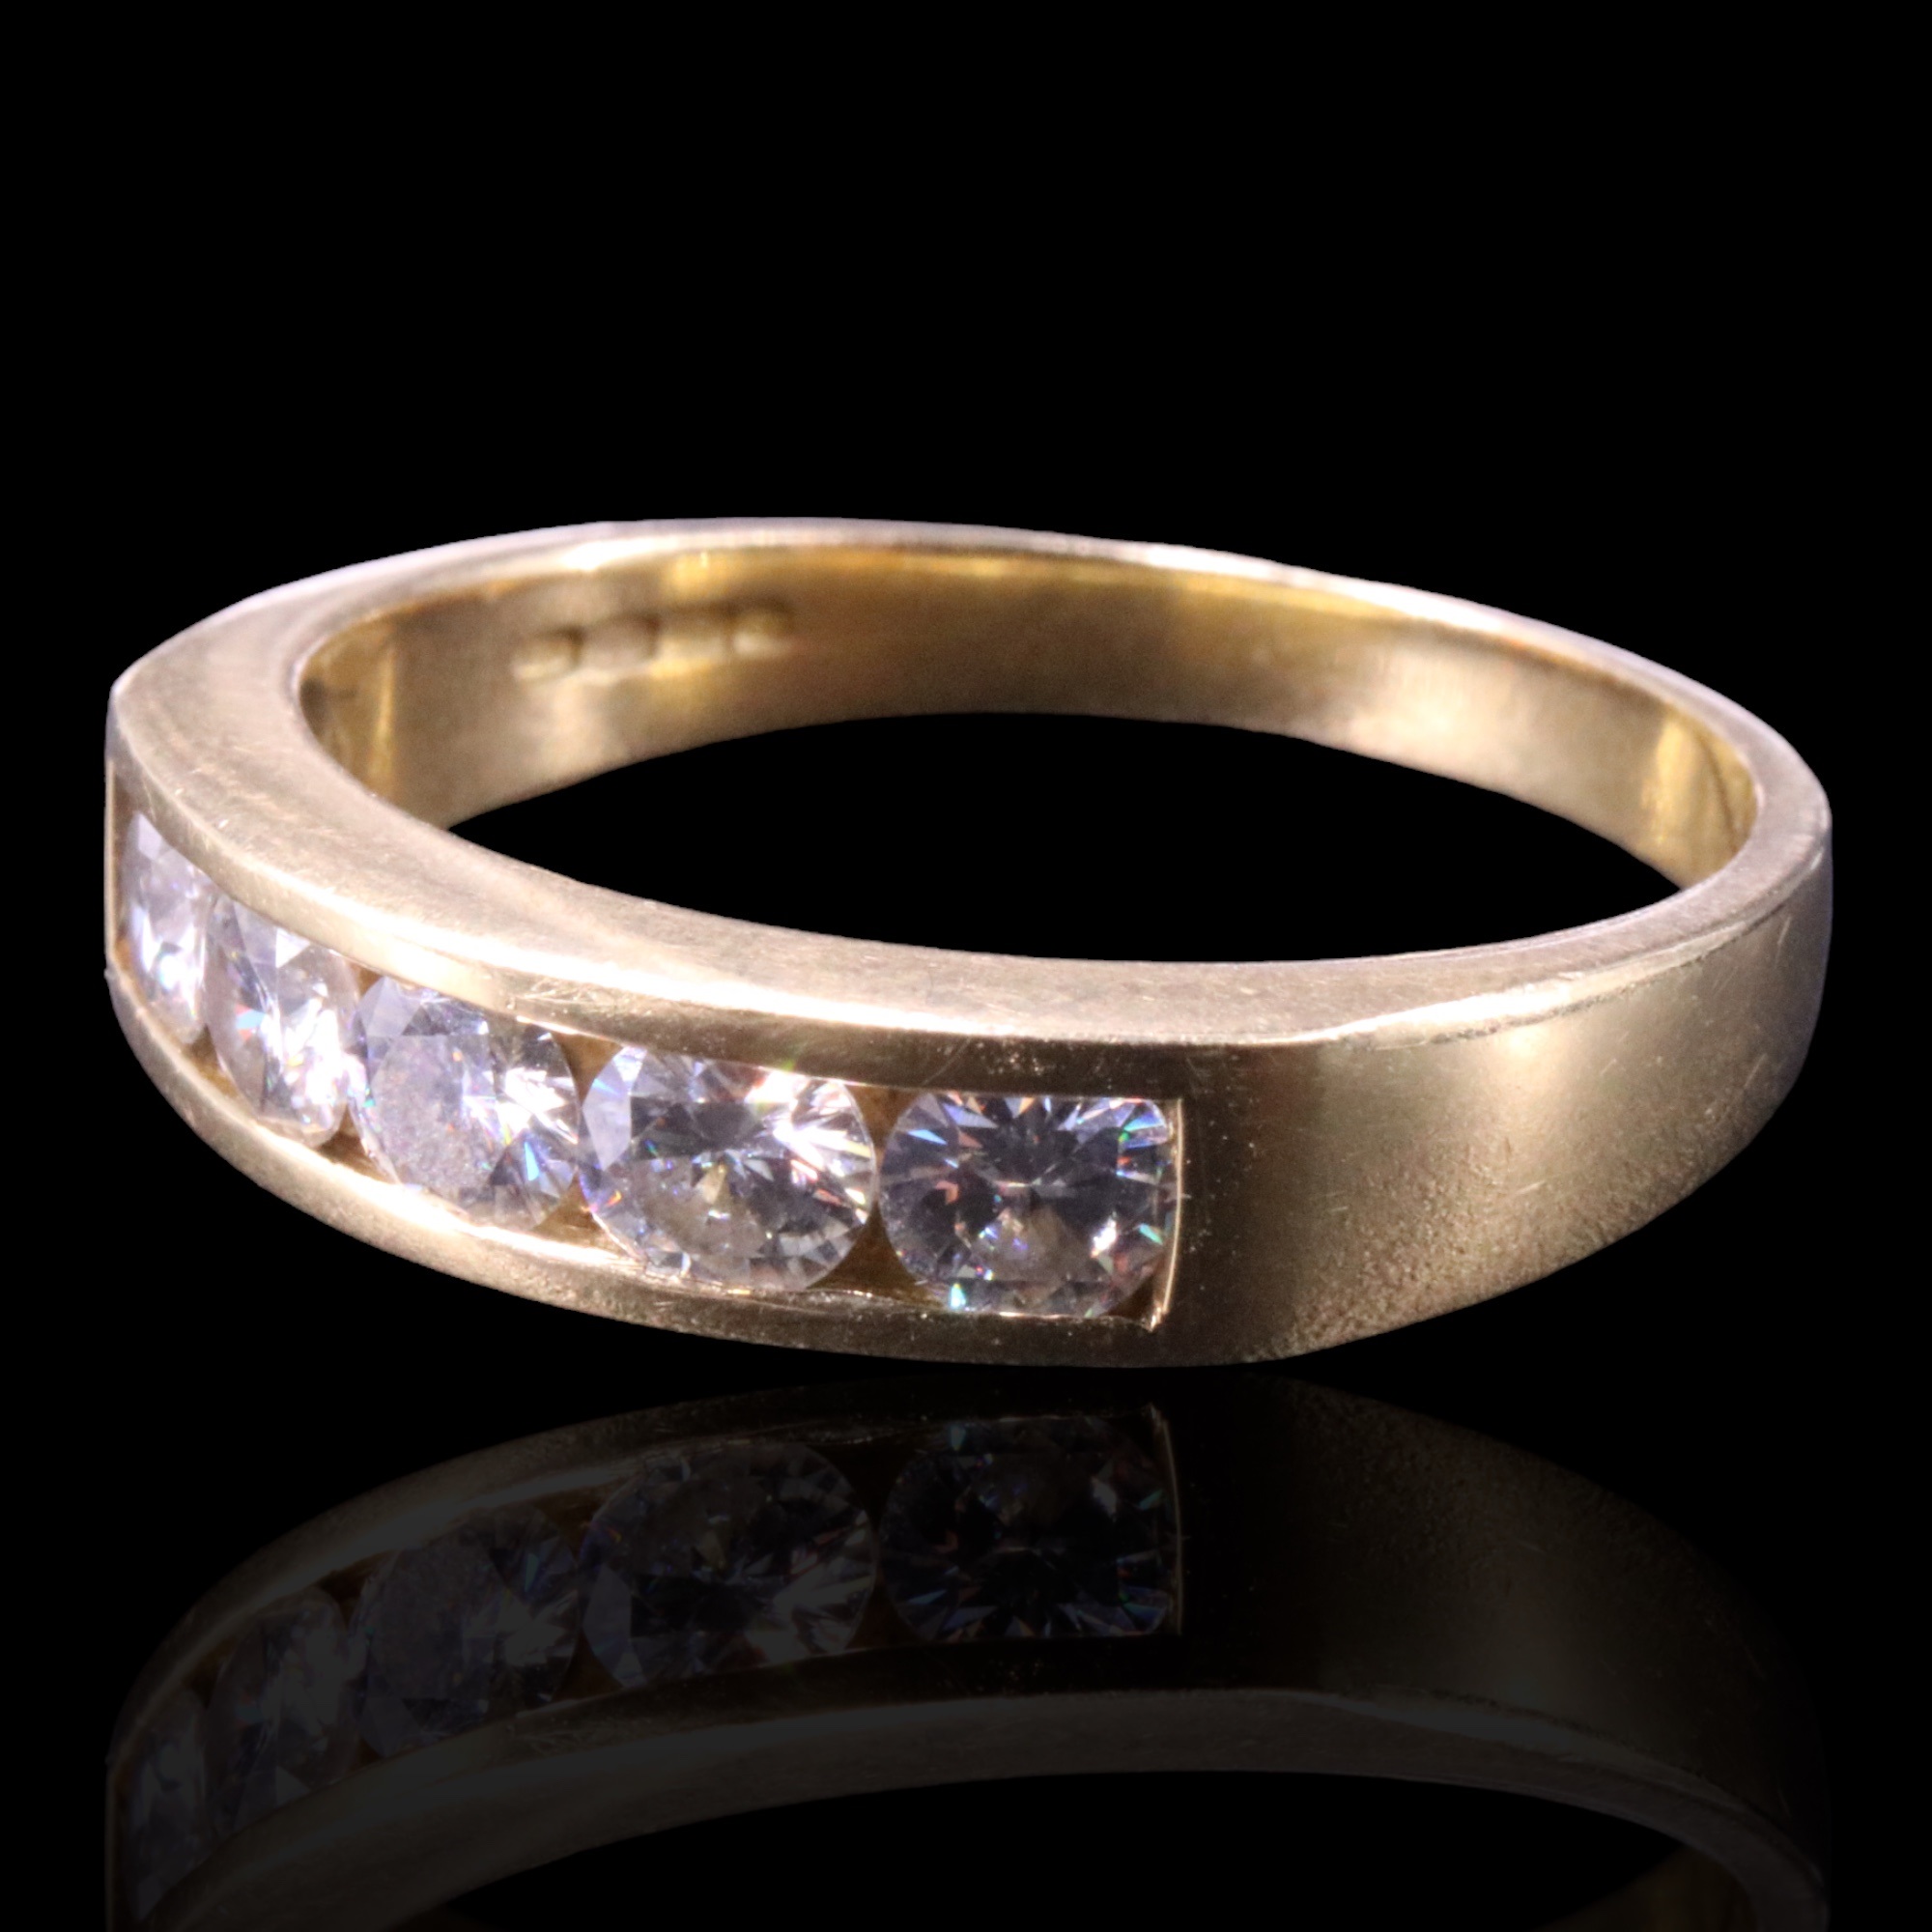 A five-stone diamond band, comprising five brilliant-cut stones of approx 0.9 cts aggregate weight